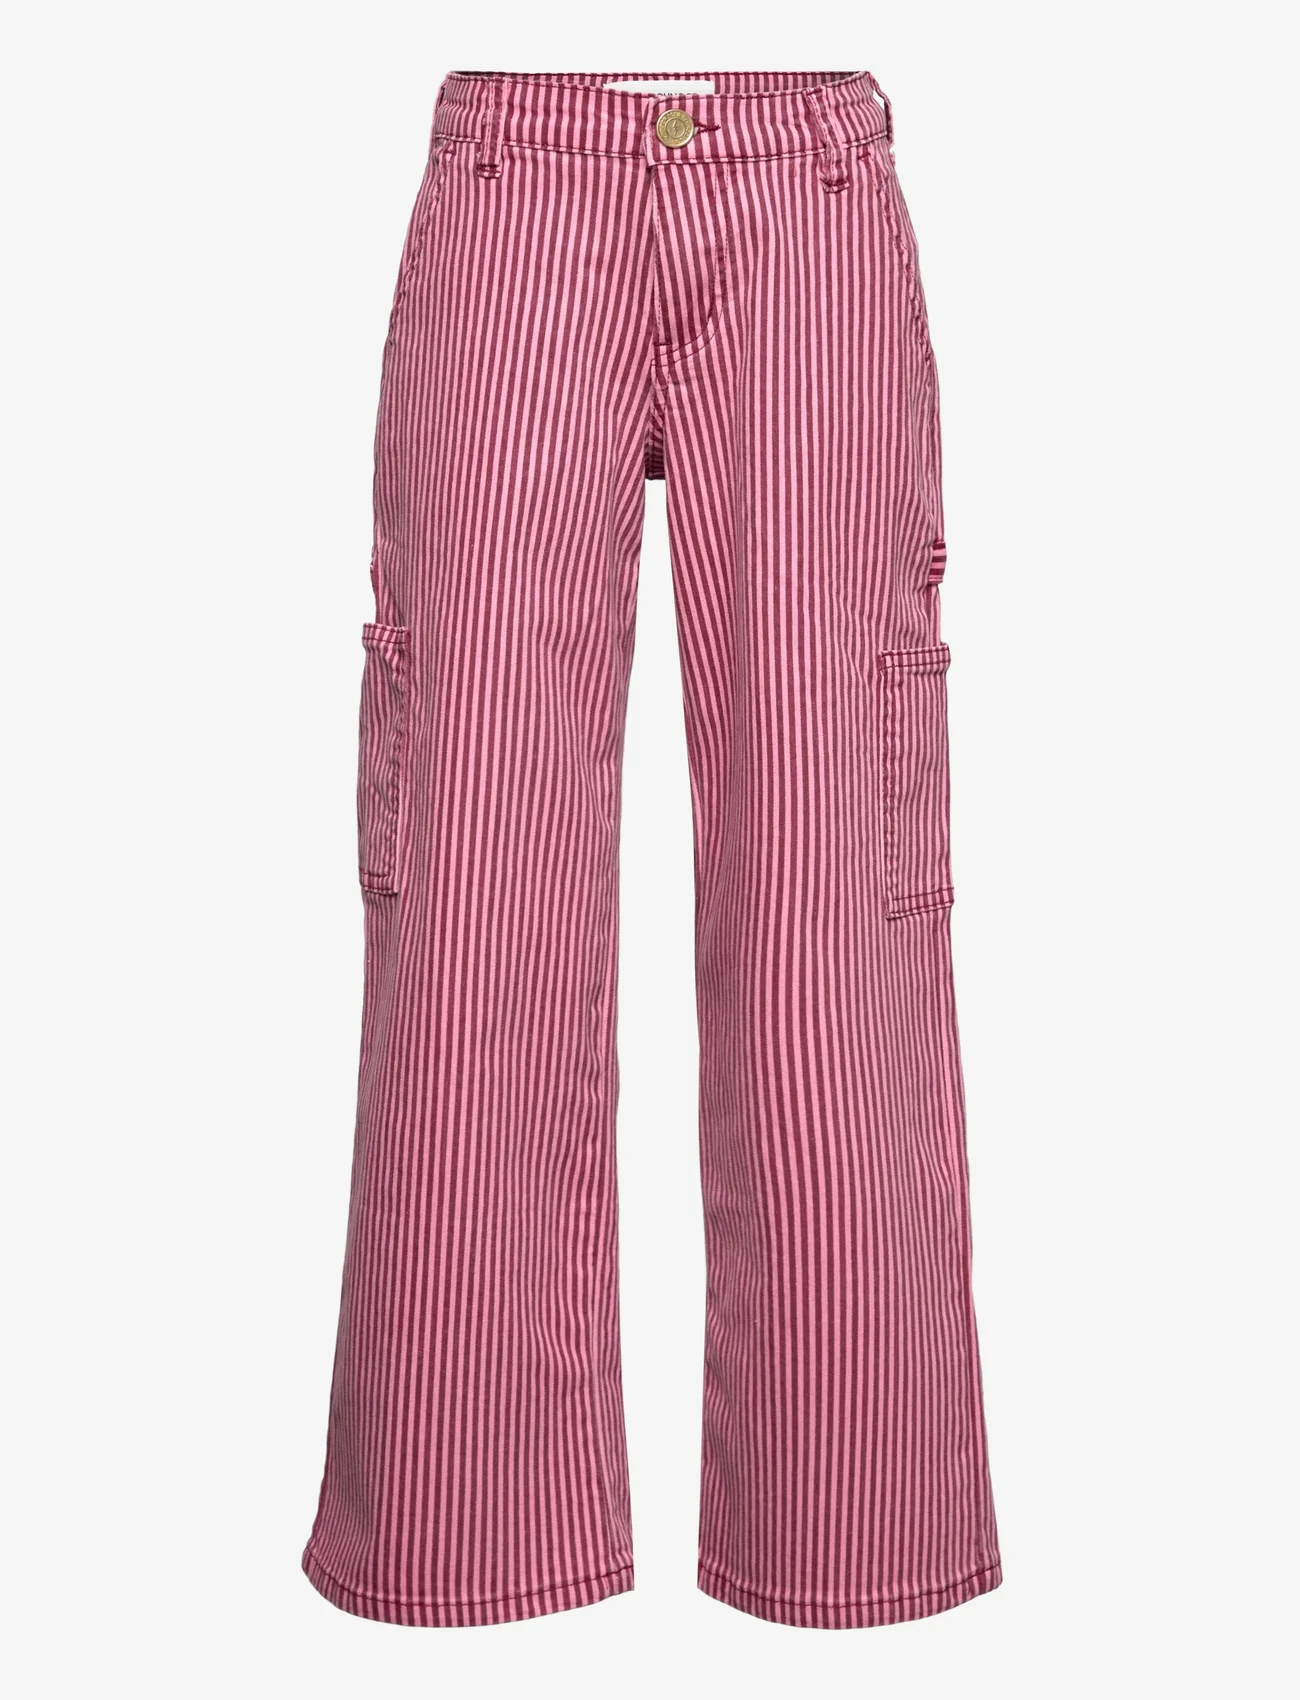 Sofie Schnoor Young - Pants - trousers - red striped - 0